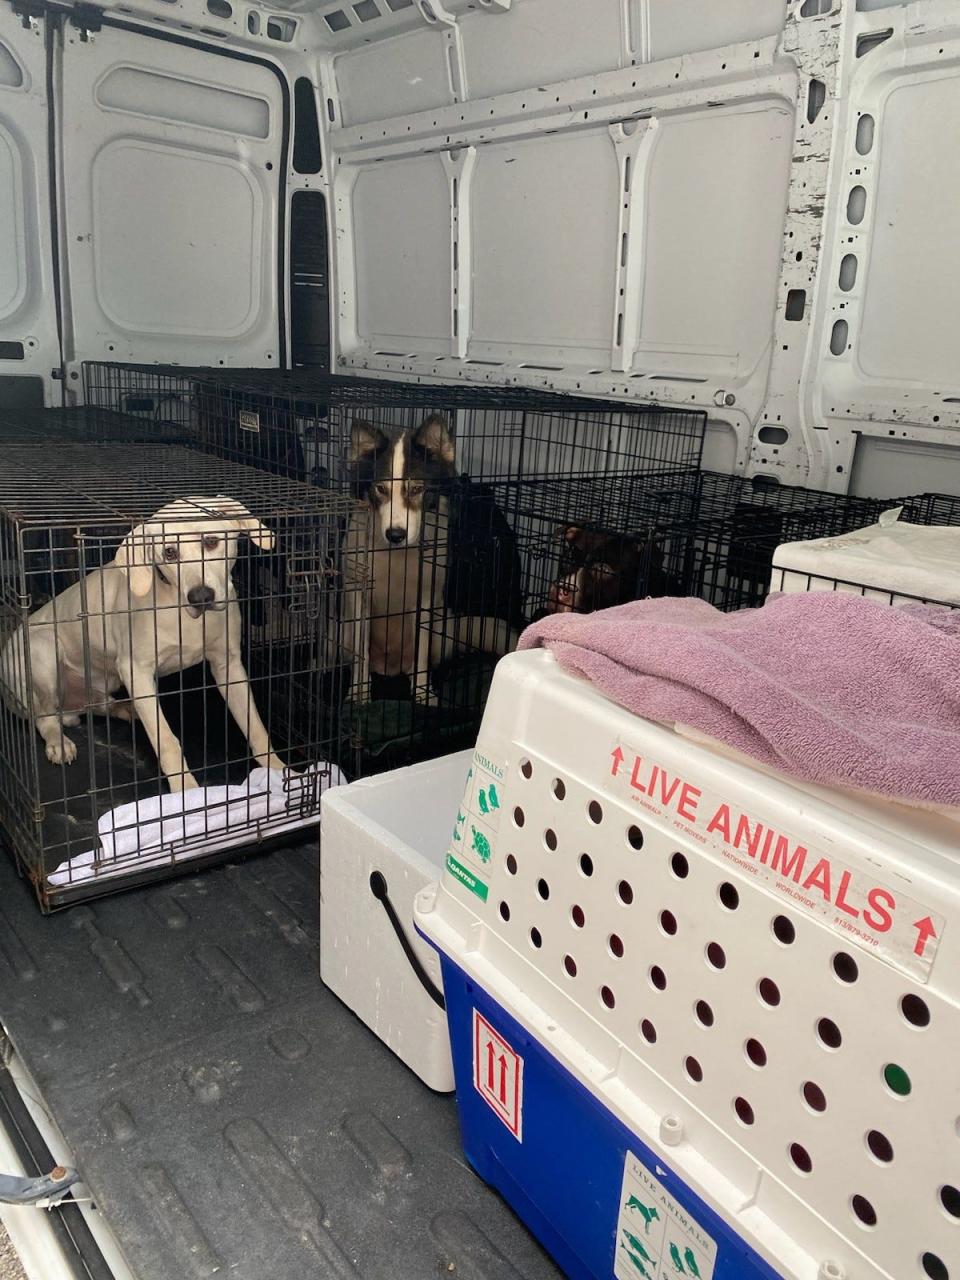 Local animal shelter Nate’s Honor Animal Rescue is sheltering 20 animals from Gilchrist County where they would have been outdoors in the path of Hurricane Idalia.